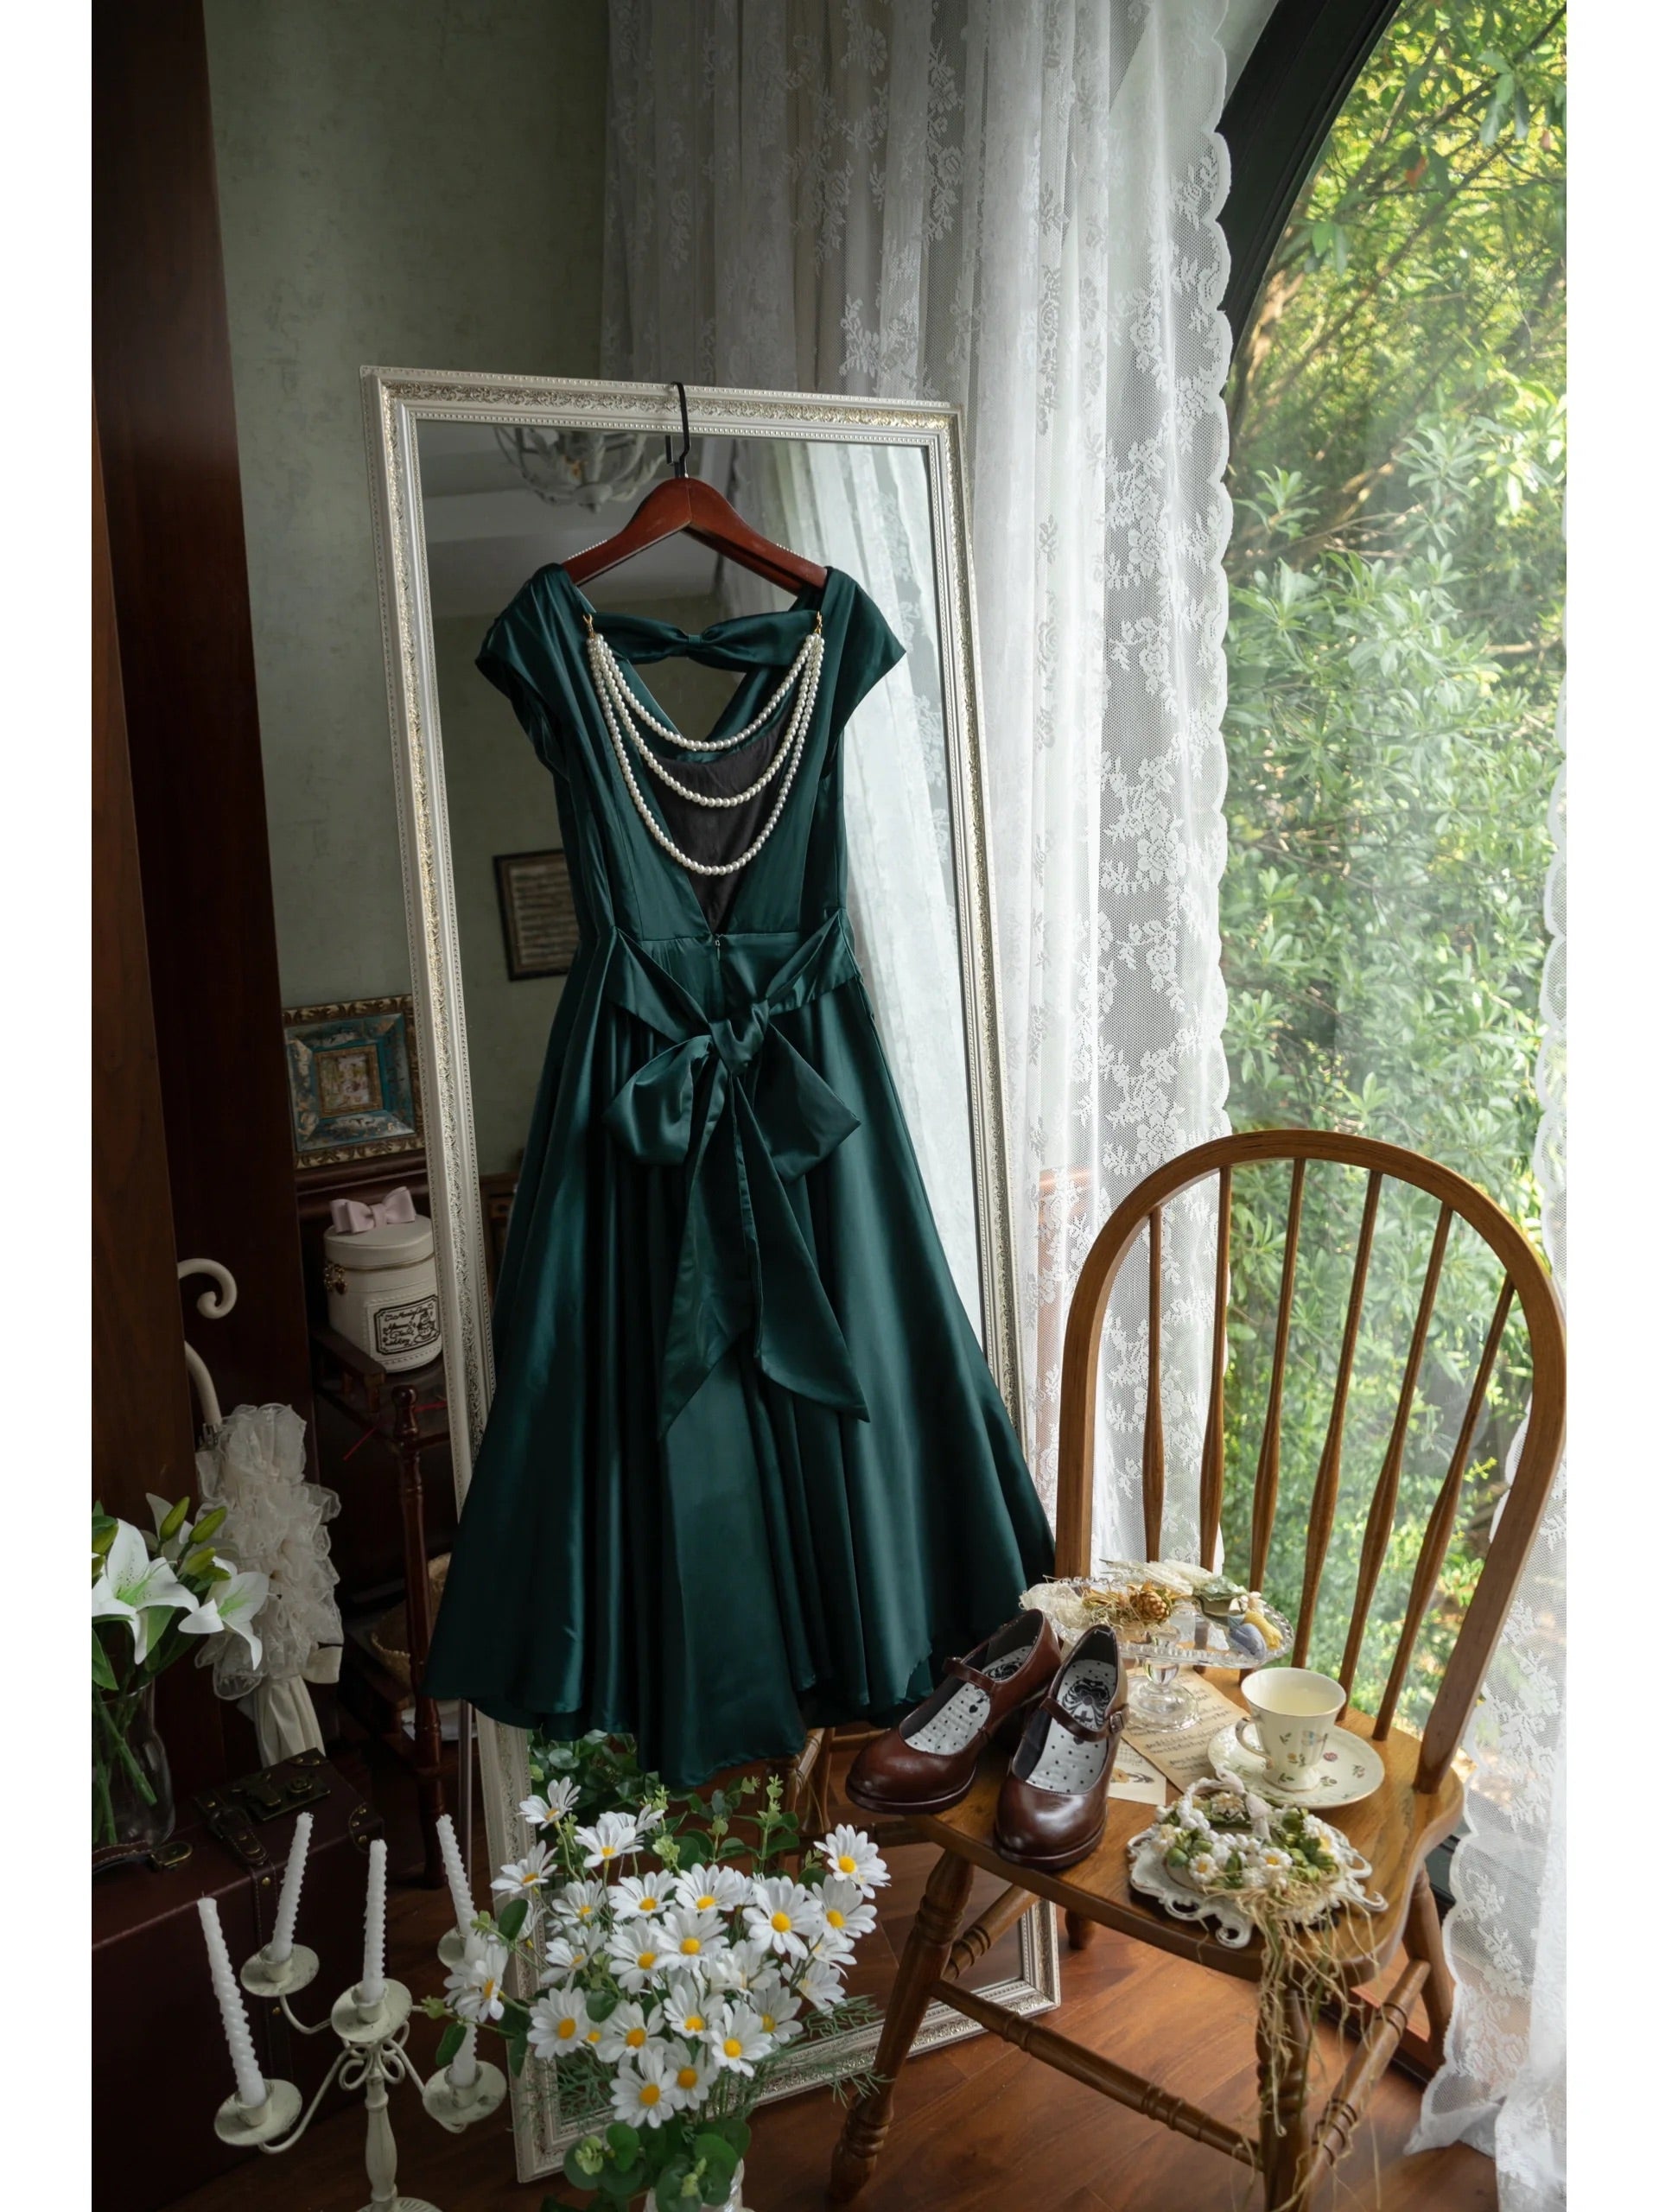 Cow Neck 50s Open Back Vintage Emerald Green Dress - DollyGown